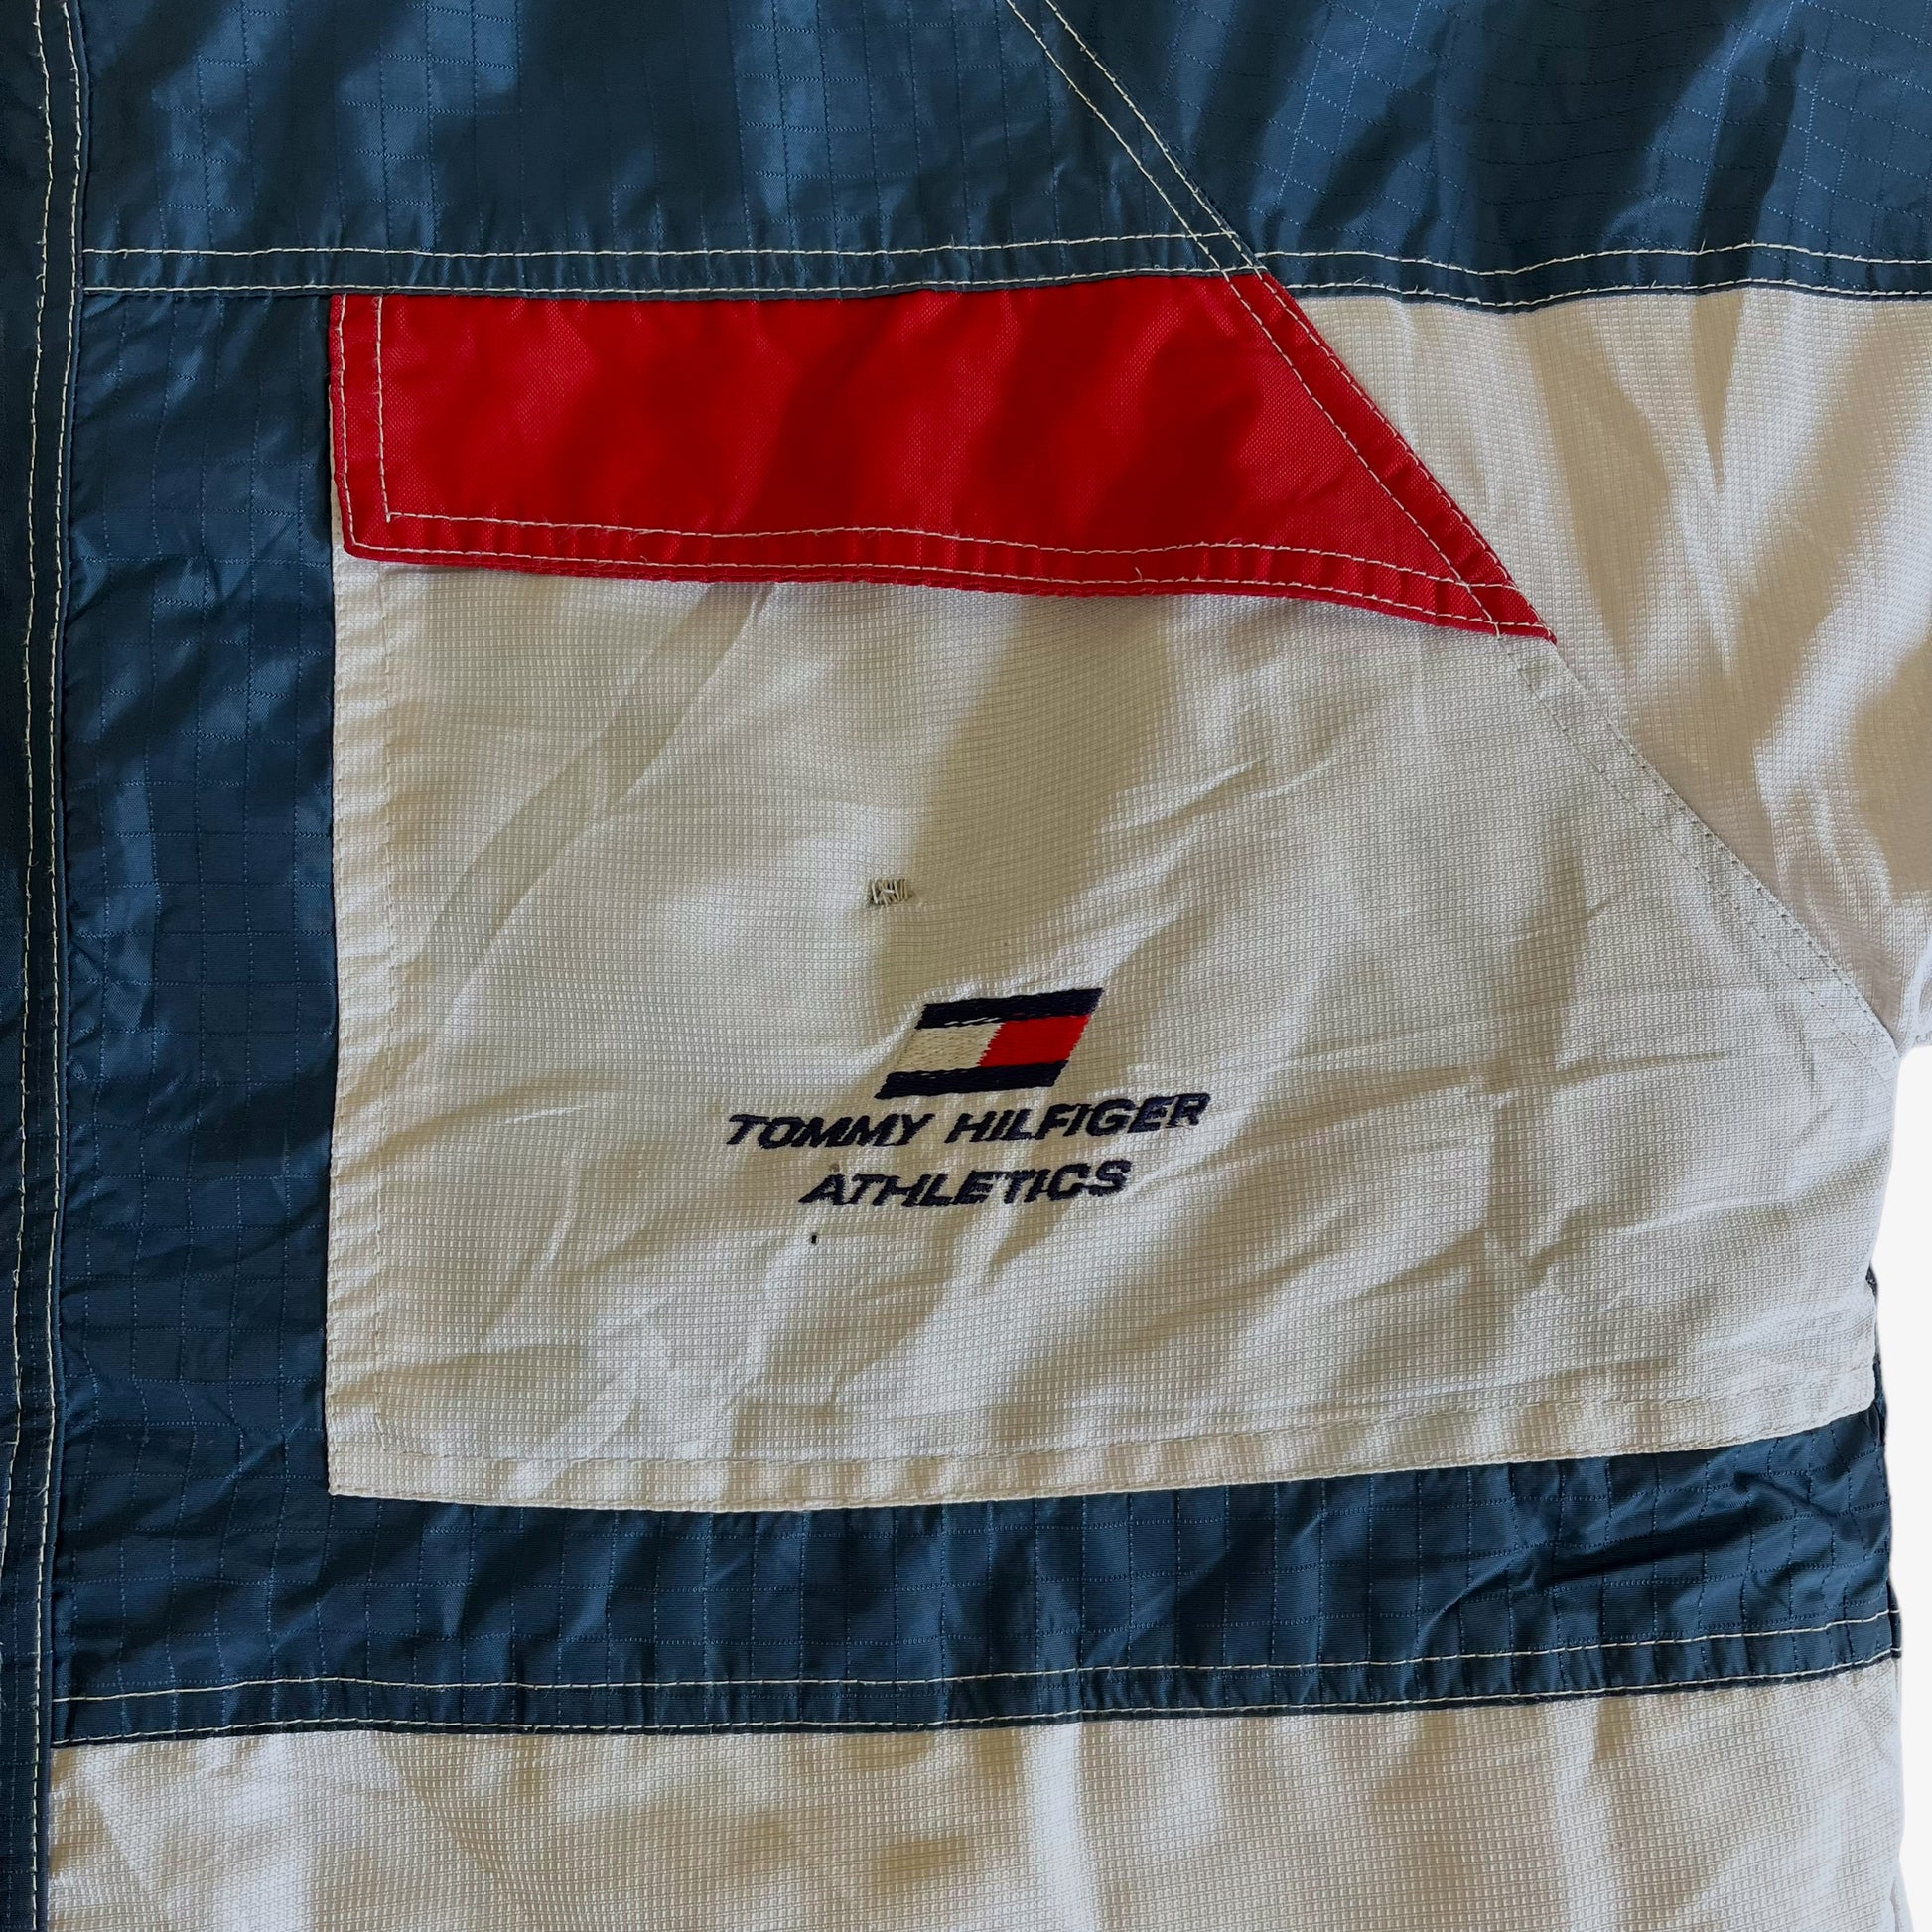 Vintage 90s Tommy Hilfiger Athletics Reversible Spell Out Puffer Jacket Logo - Casspios Dream